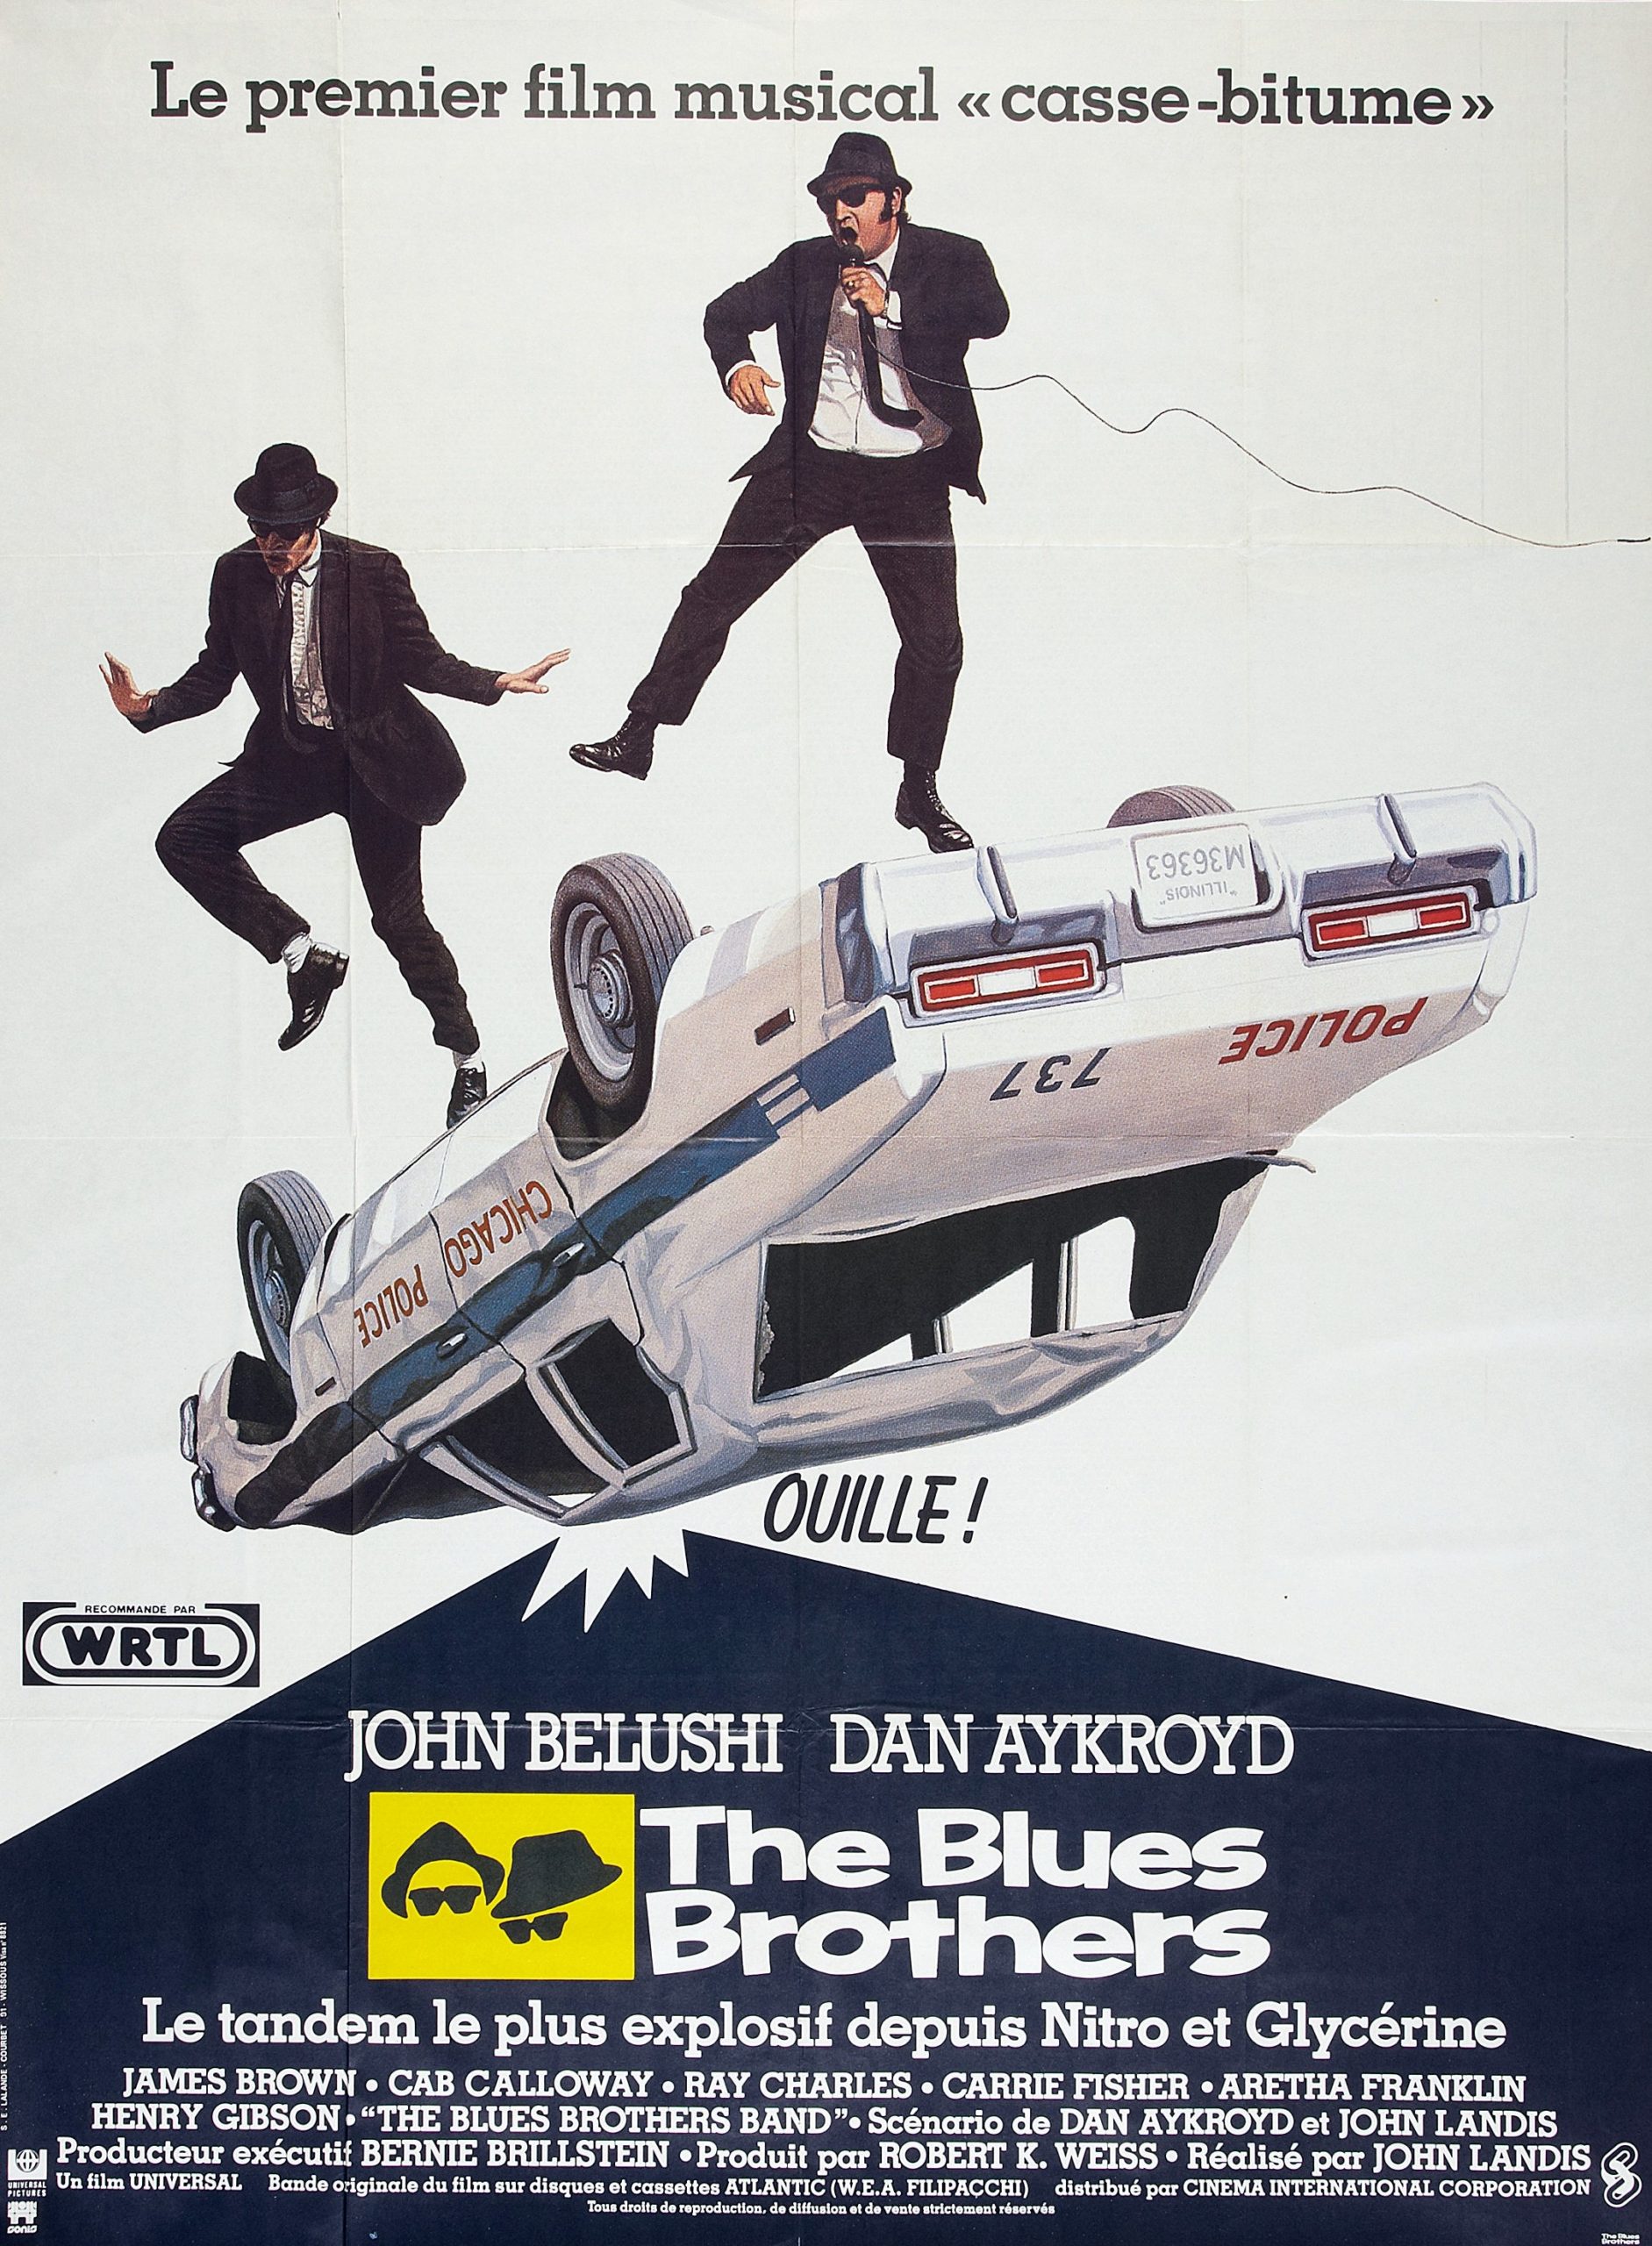 https://antreducinema.fr/wp-content/uploads/2022/02/THE-BLUES-BROTHERS-scaled.jpg